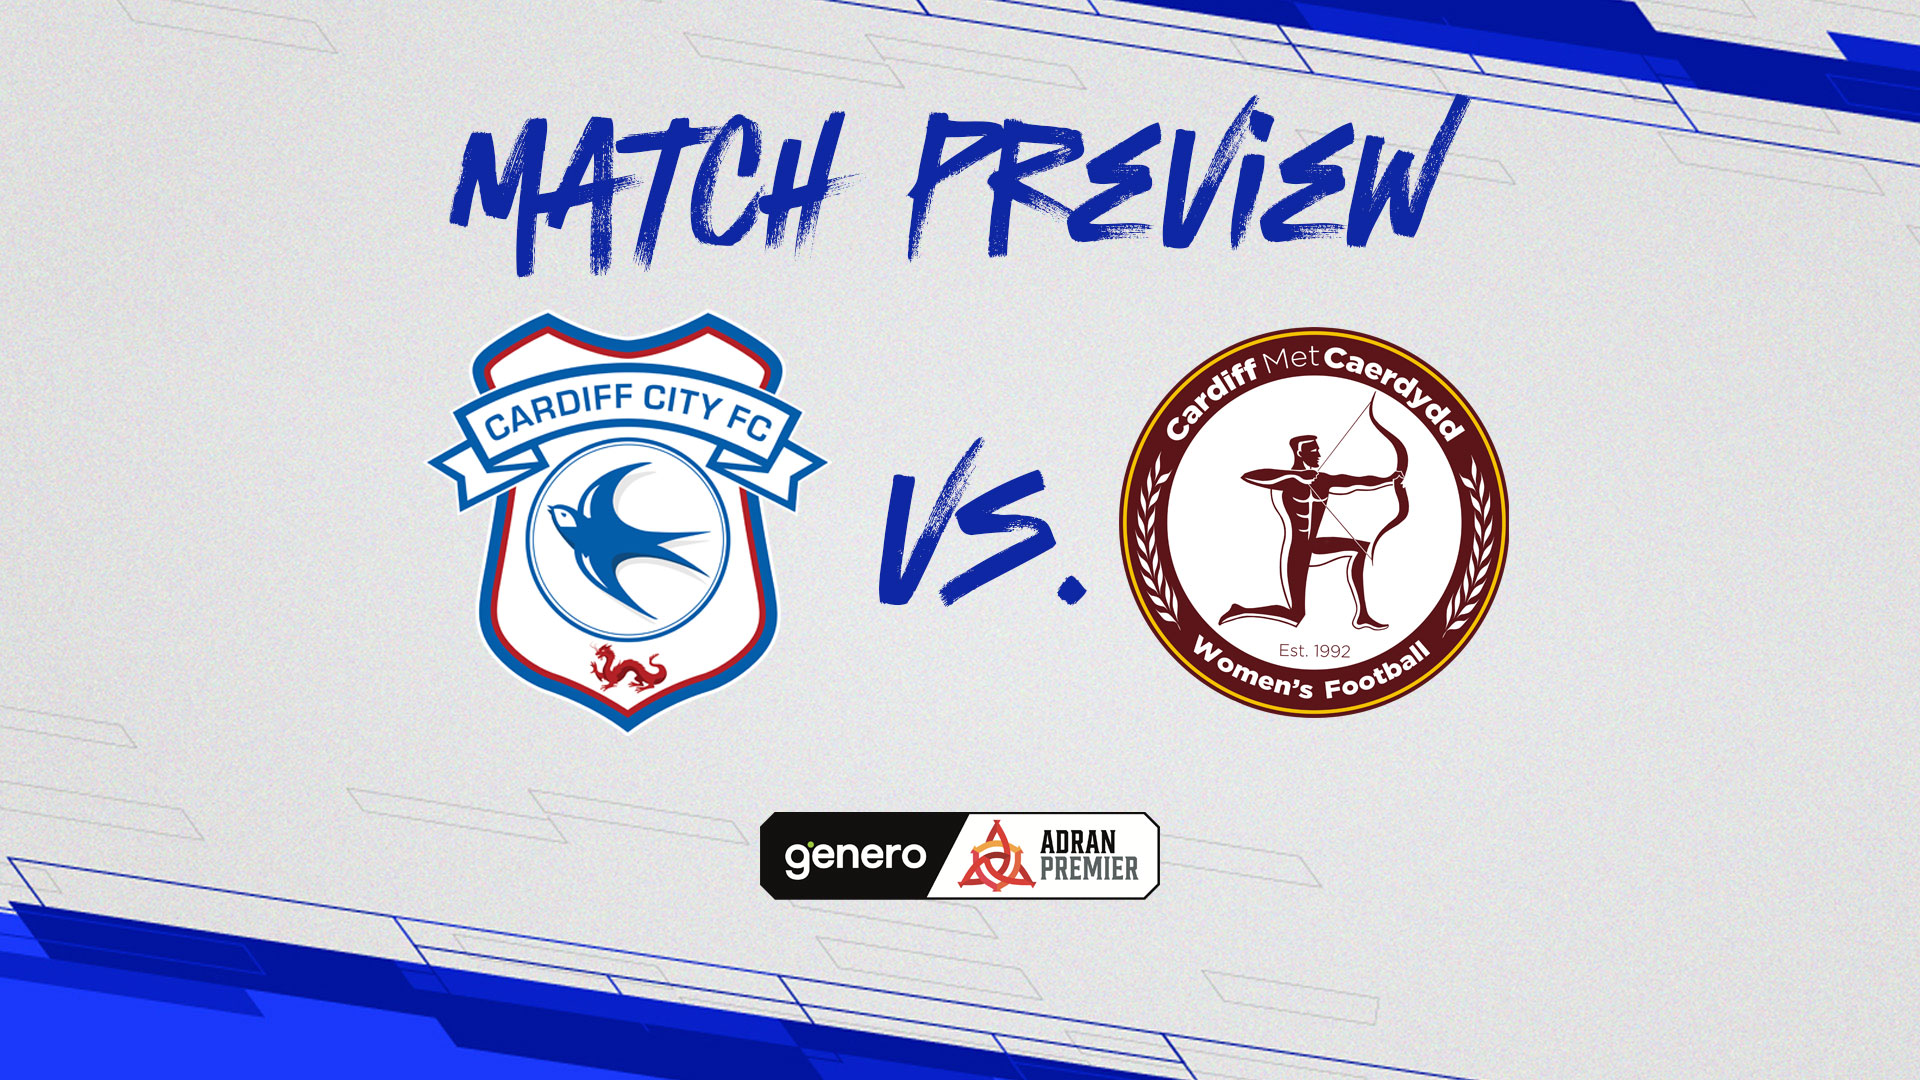 Match Preview: Cardiff City vs. Cardiff Met